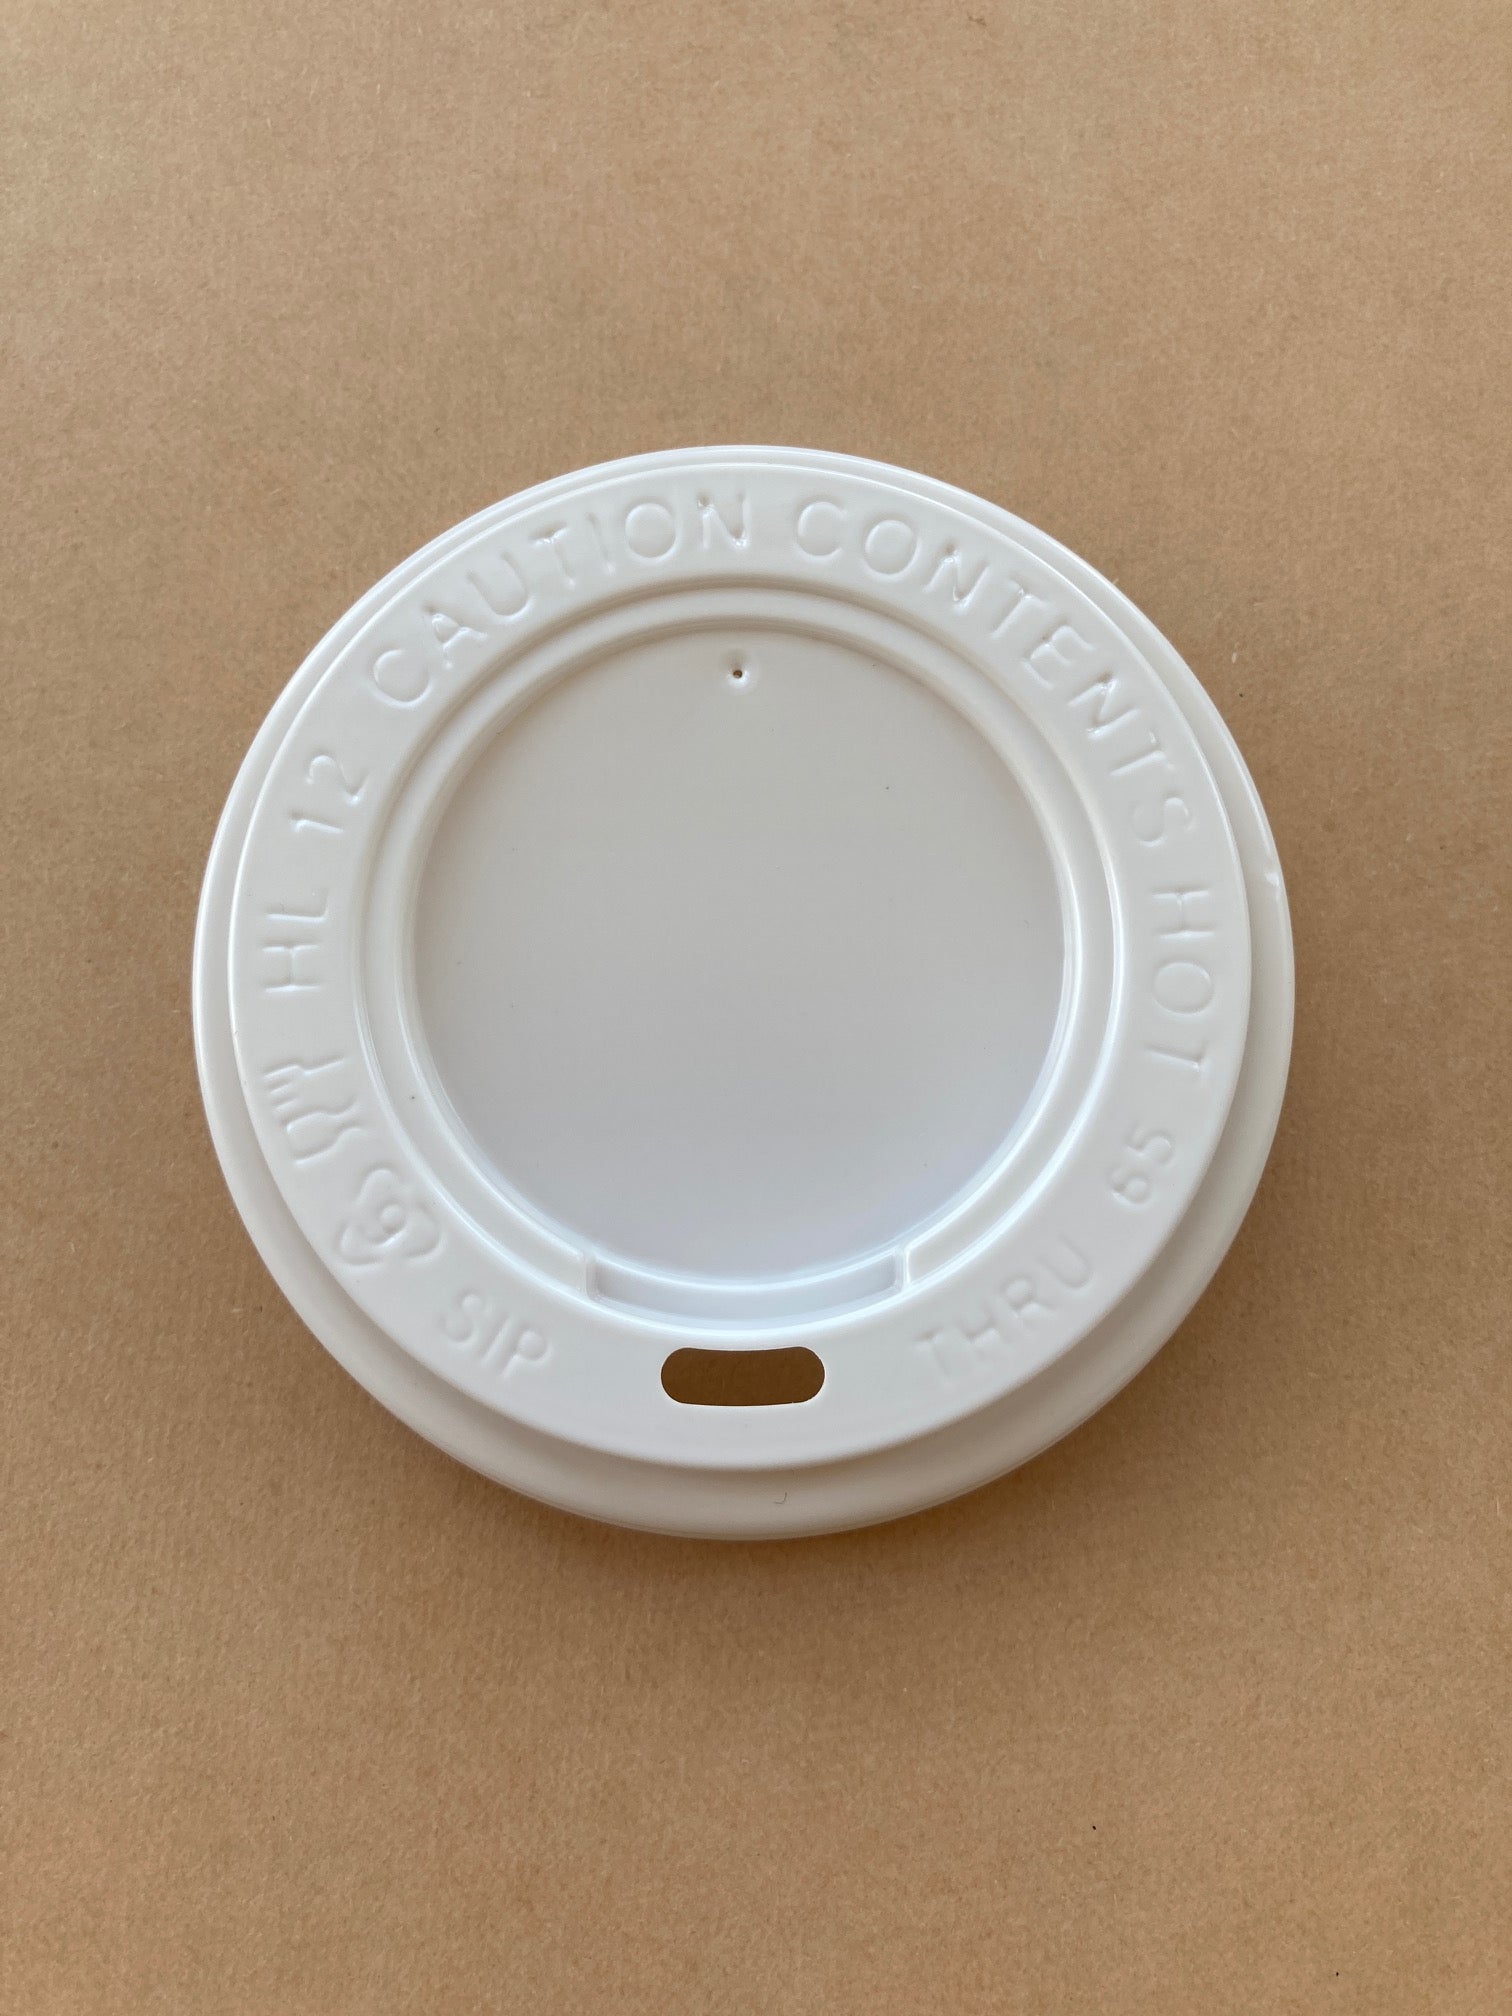 Plastic Dome Lids White for Hot Paper Cups 